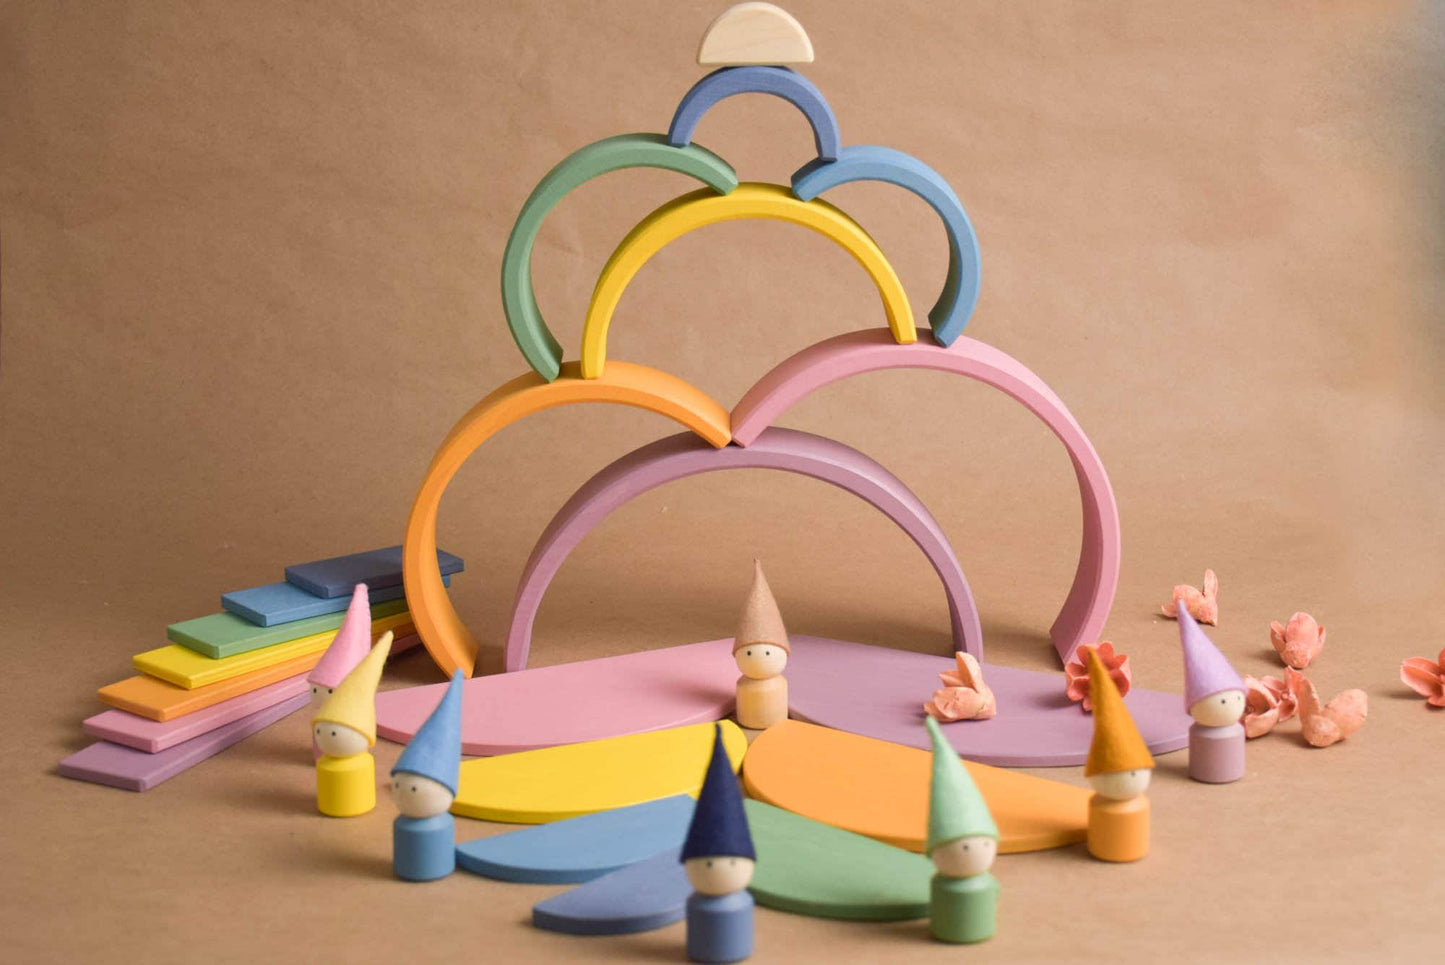 Montessori Wooden Rainbow Stacking Toy Set of 30 pcs. Pastel, Personalized Gifts For Kids, Baby 1 Years Old Girl Christmas Gift, Room Decor